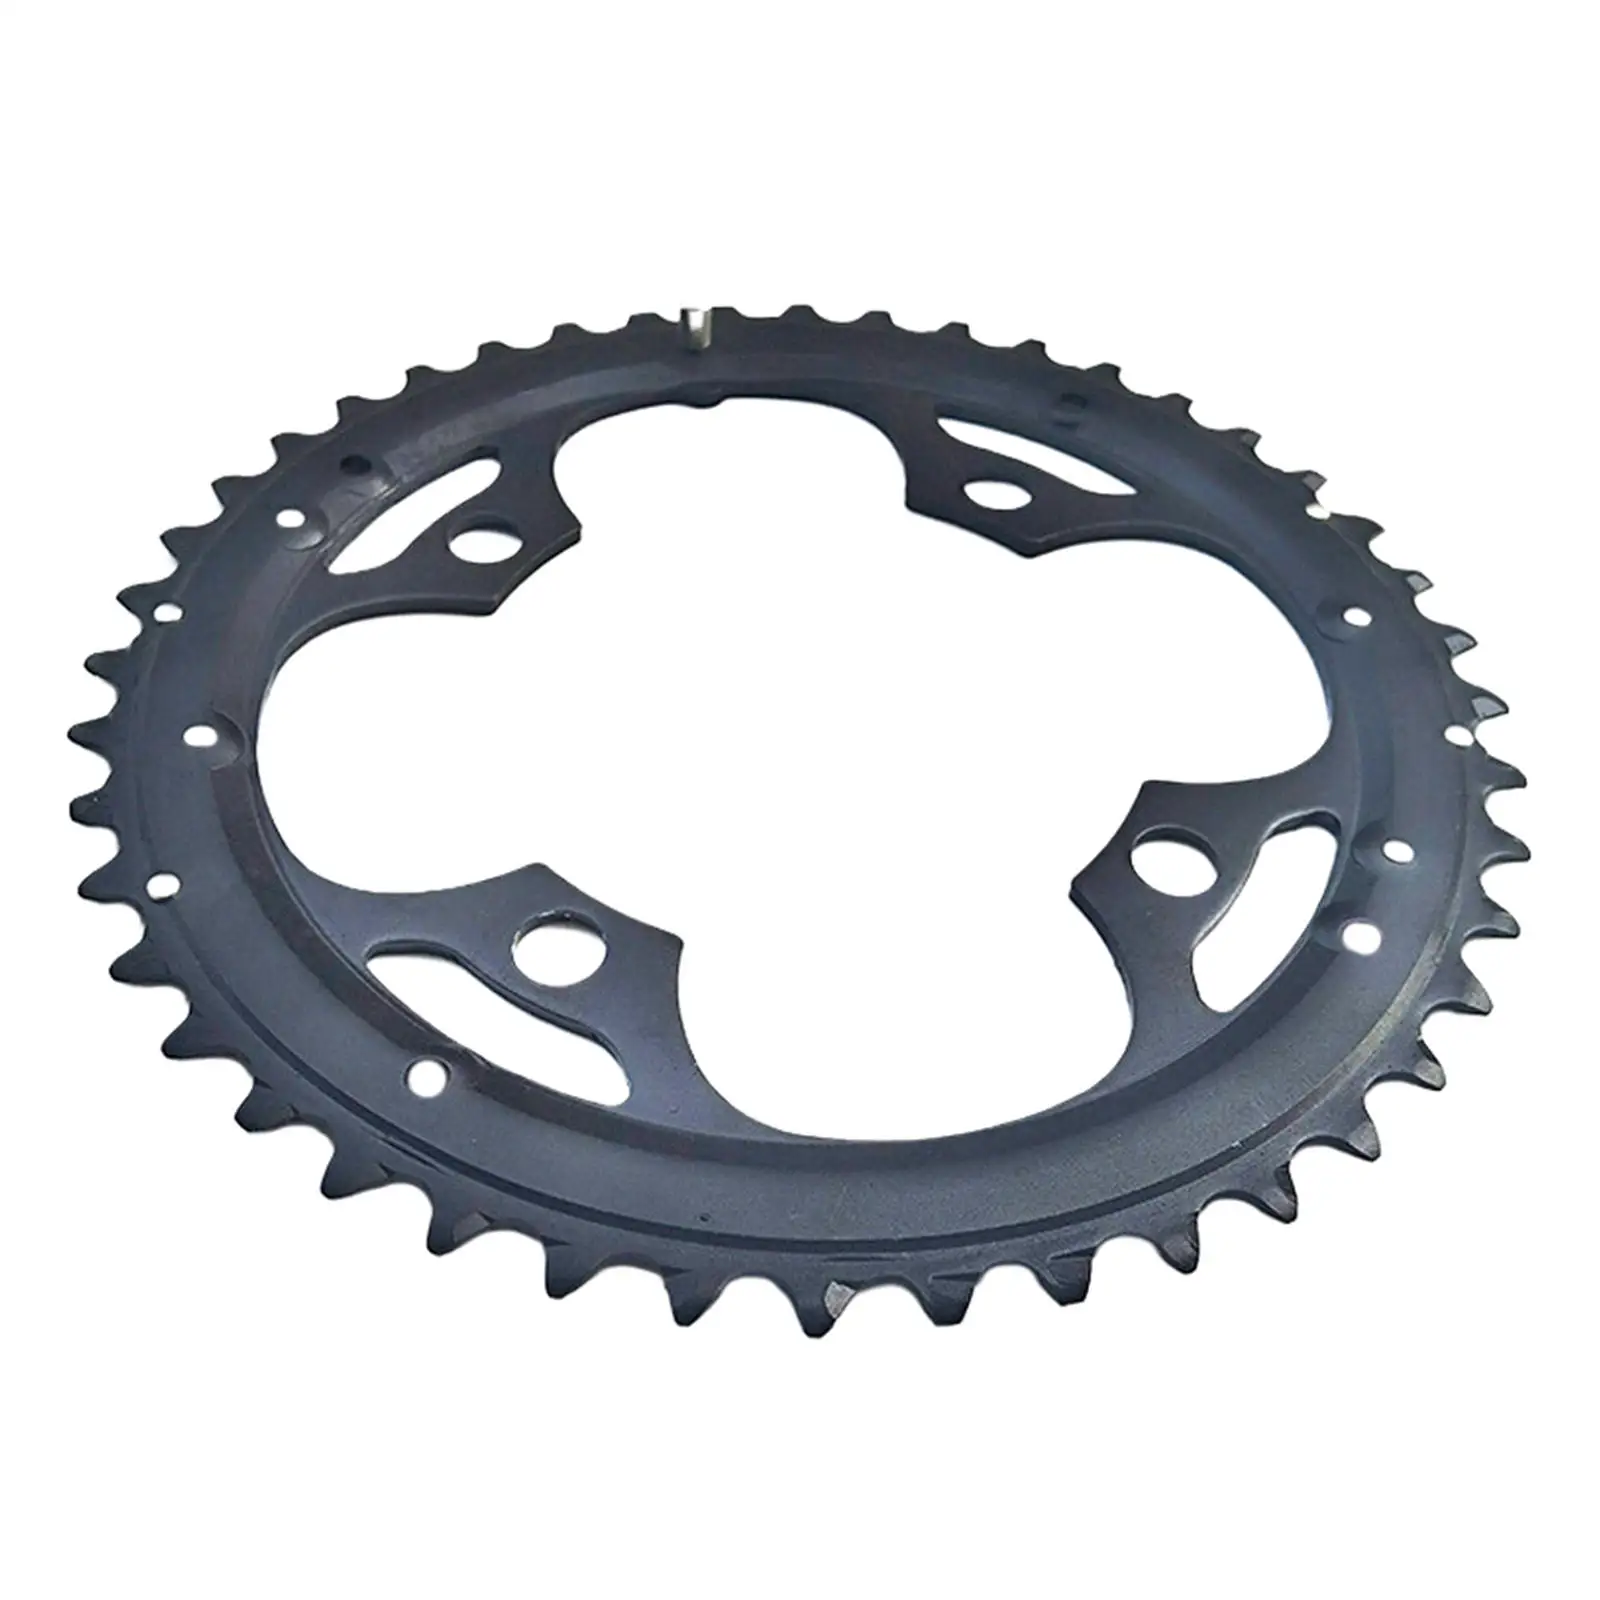 Bike Single Chainring 104 BCD Aluminum Alloy Black 44T Bicycle Narrow Wide Chainring for 8 9 Speed Fat Bikes Mountain Bike